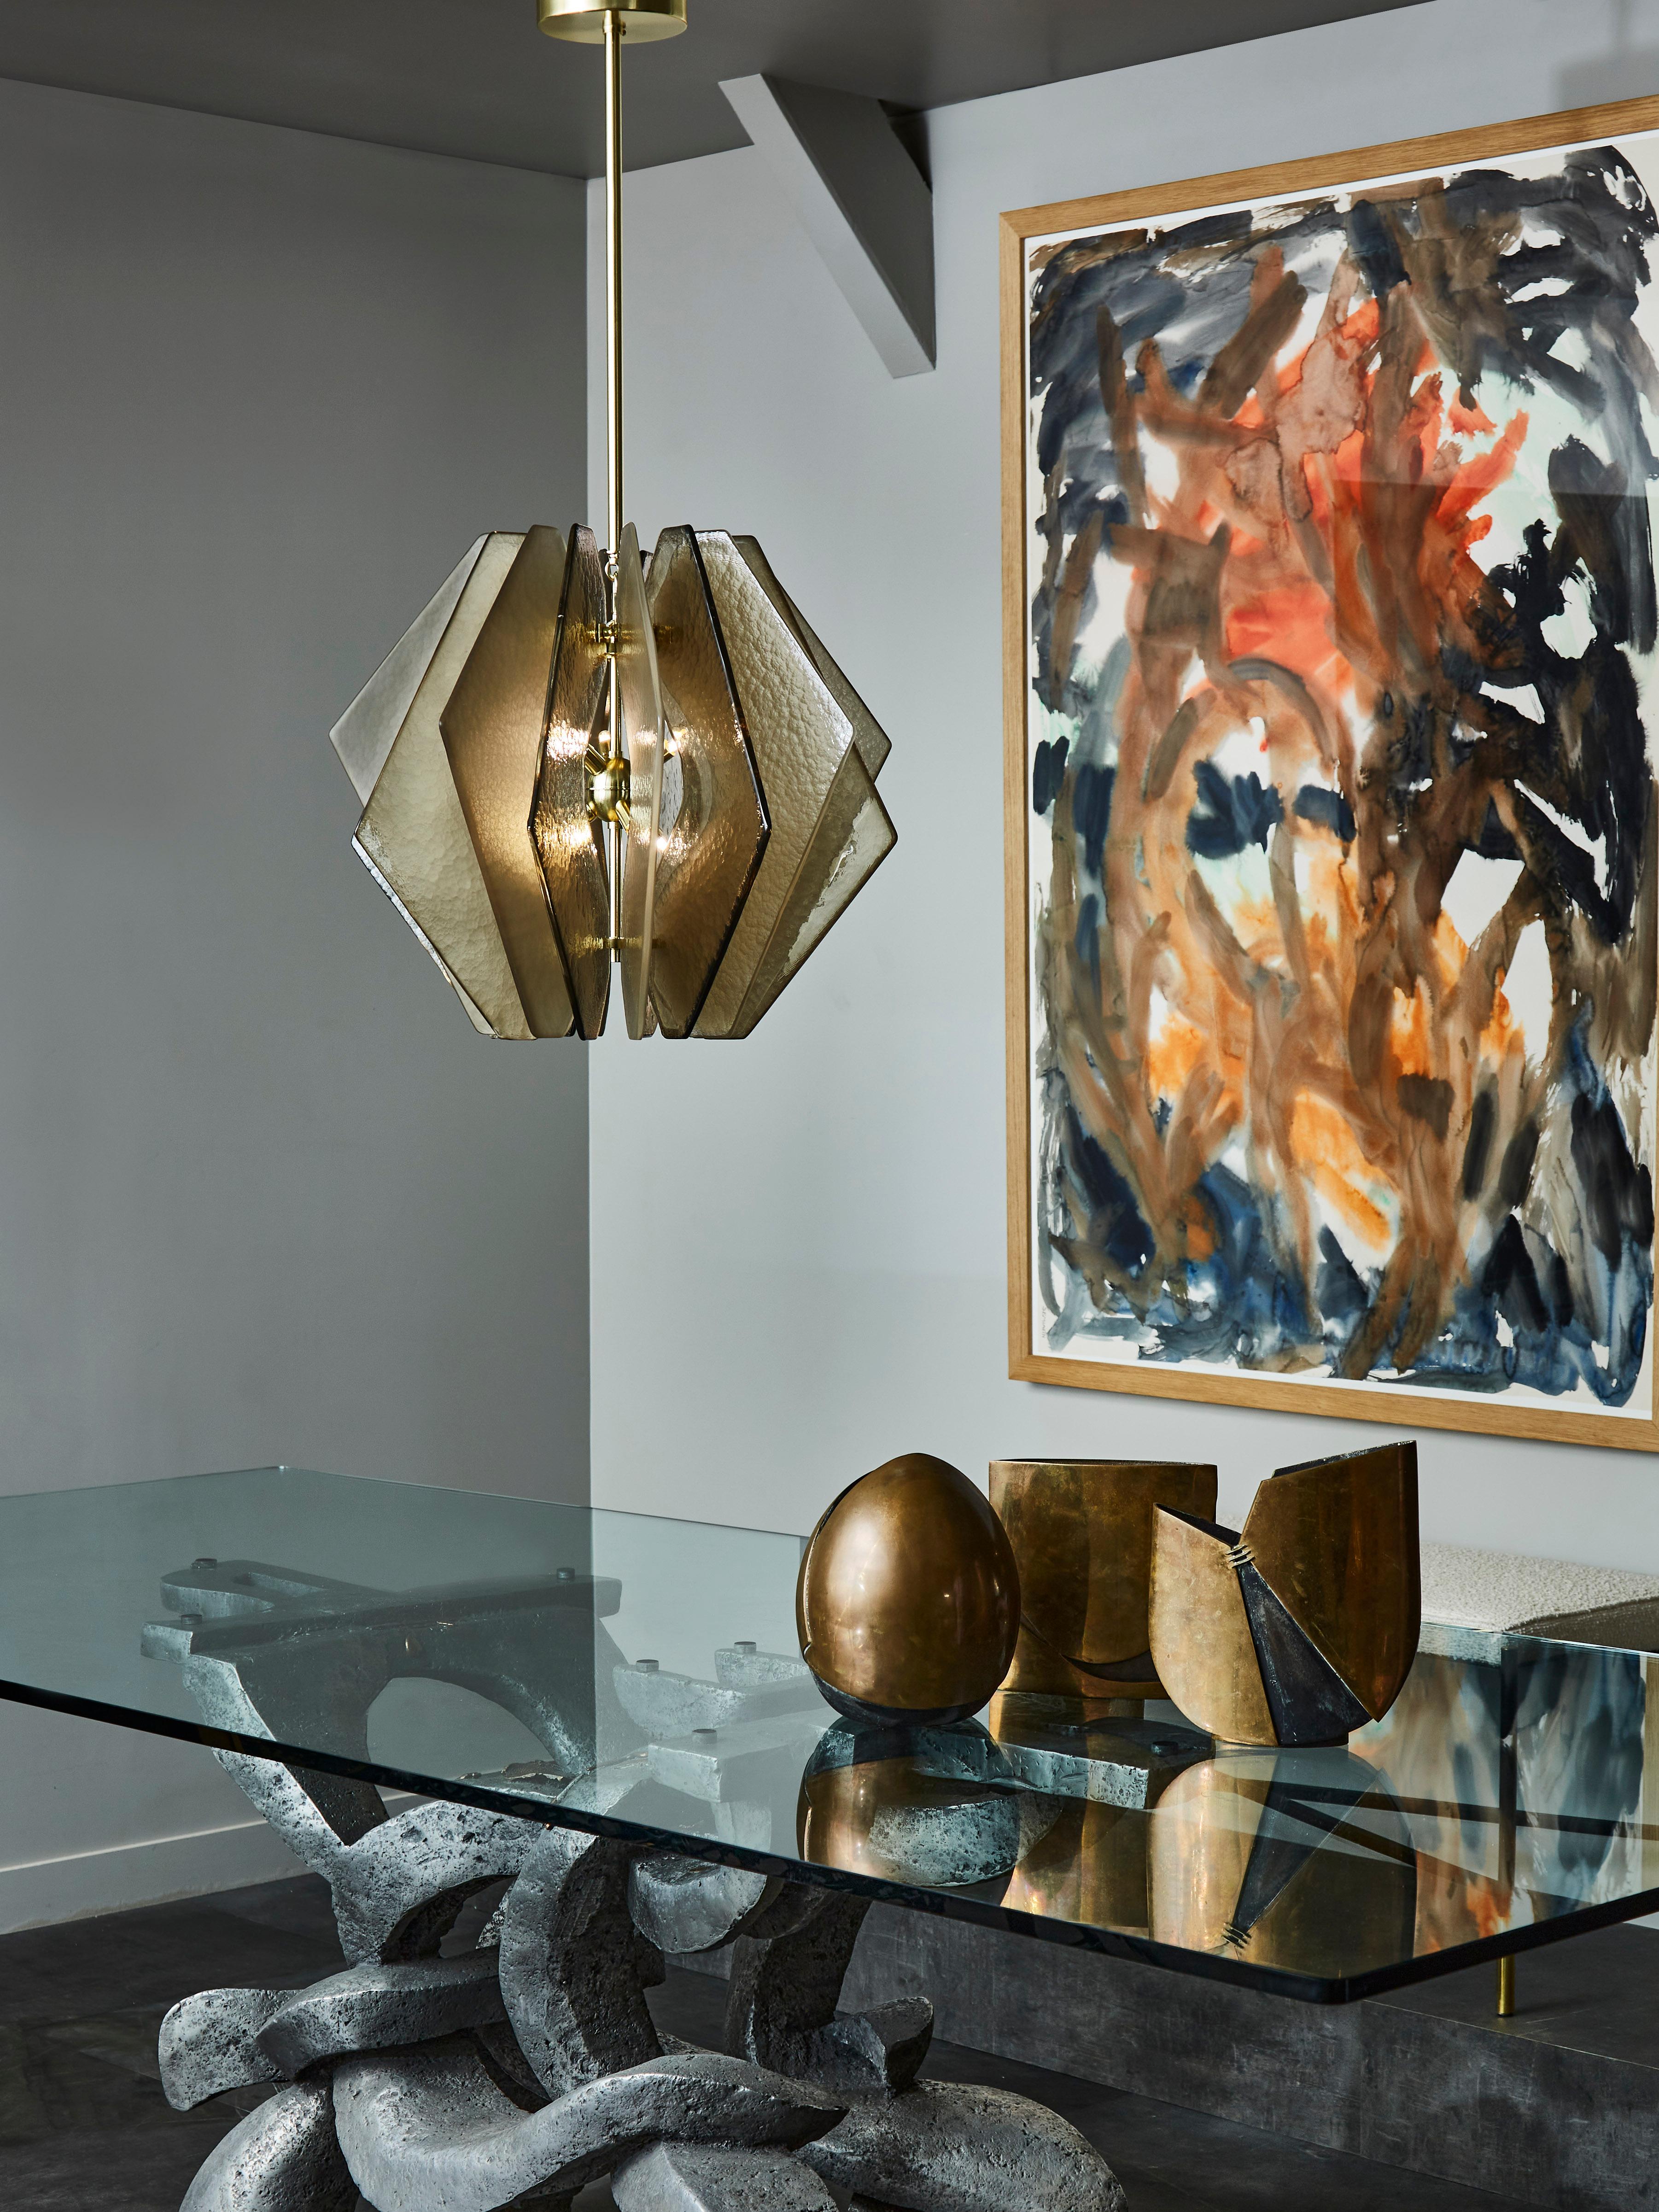 Satin brass suspension with decorative and asymmetrical glass slabs placed all around the central structure.

The slabs are made of frosted murano glass tinted in two different shades bronze.

Six lights per suspension.